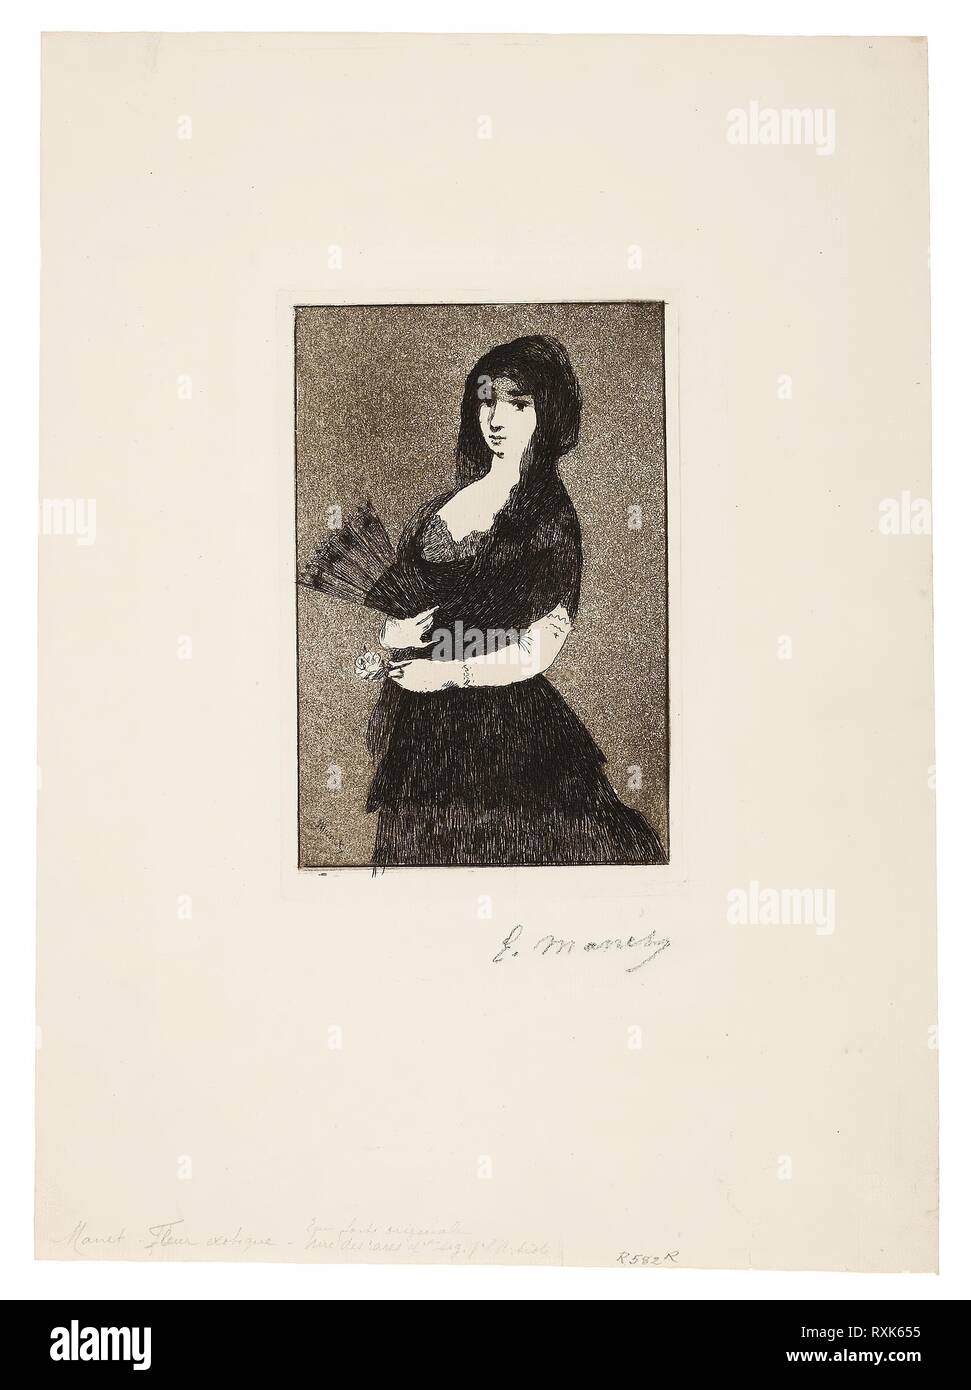 Exotic Flower (Woman in a Mantilla). Édouard Manet (French, 1832-1883); published by Philippe Burty (French, 1830-1890); written by Armand Renaud (French, 1836-1895). Date: 1868. Dimensions: 162 × 106 mm (image); 175 × 116 mm (plate); 353 × 257 mm (sheet). Etching and aquatint in warm black on ivory laid paper. Origin: France. Museum: The Chicago Art Institute. Stock Photo